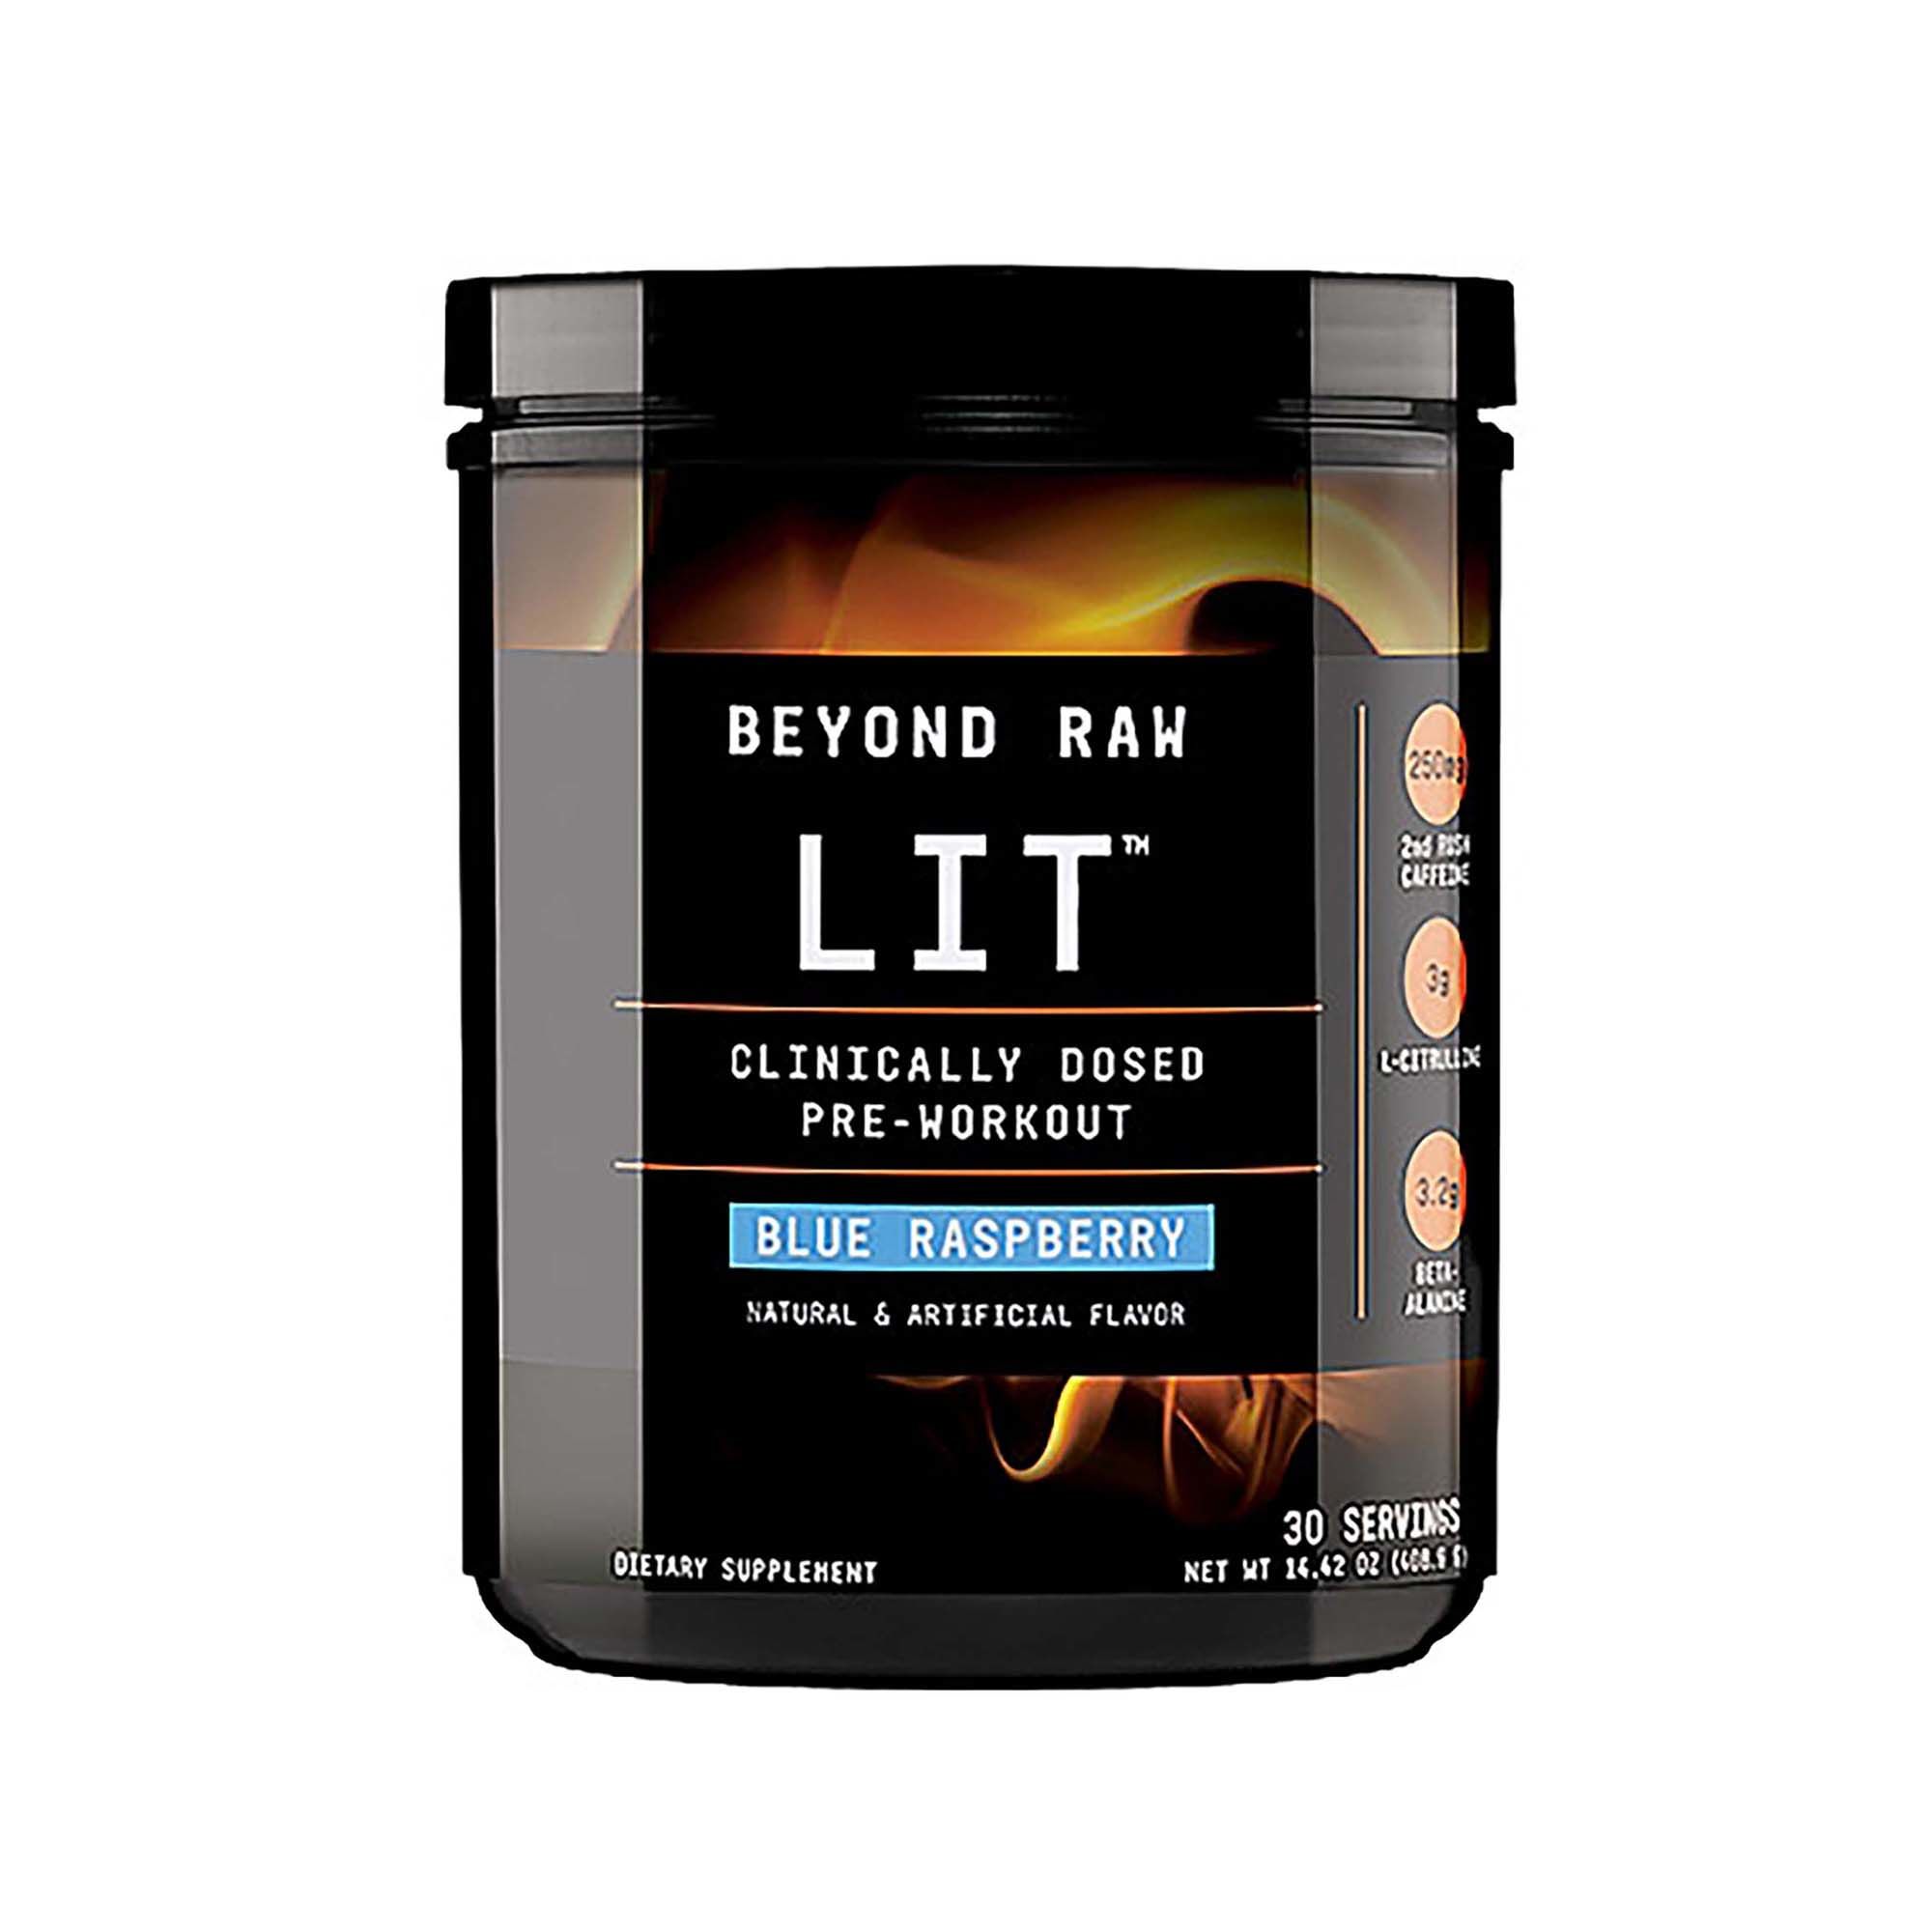 15 Minute Gnc Beyond Raw Pre Workout for Push Pull Legs